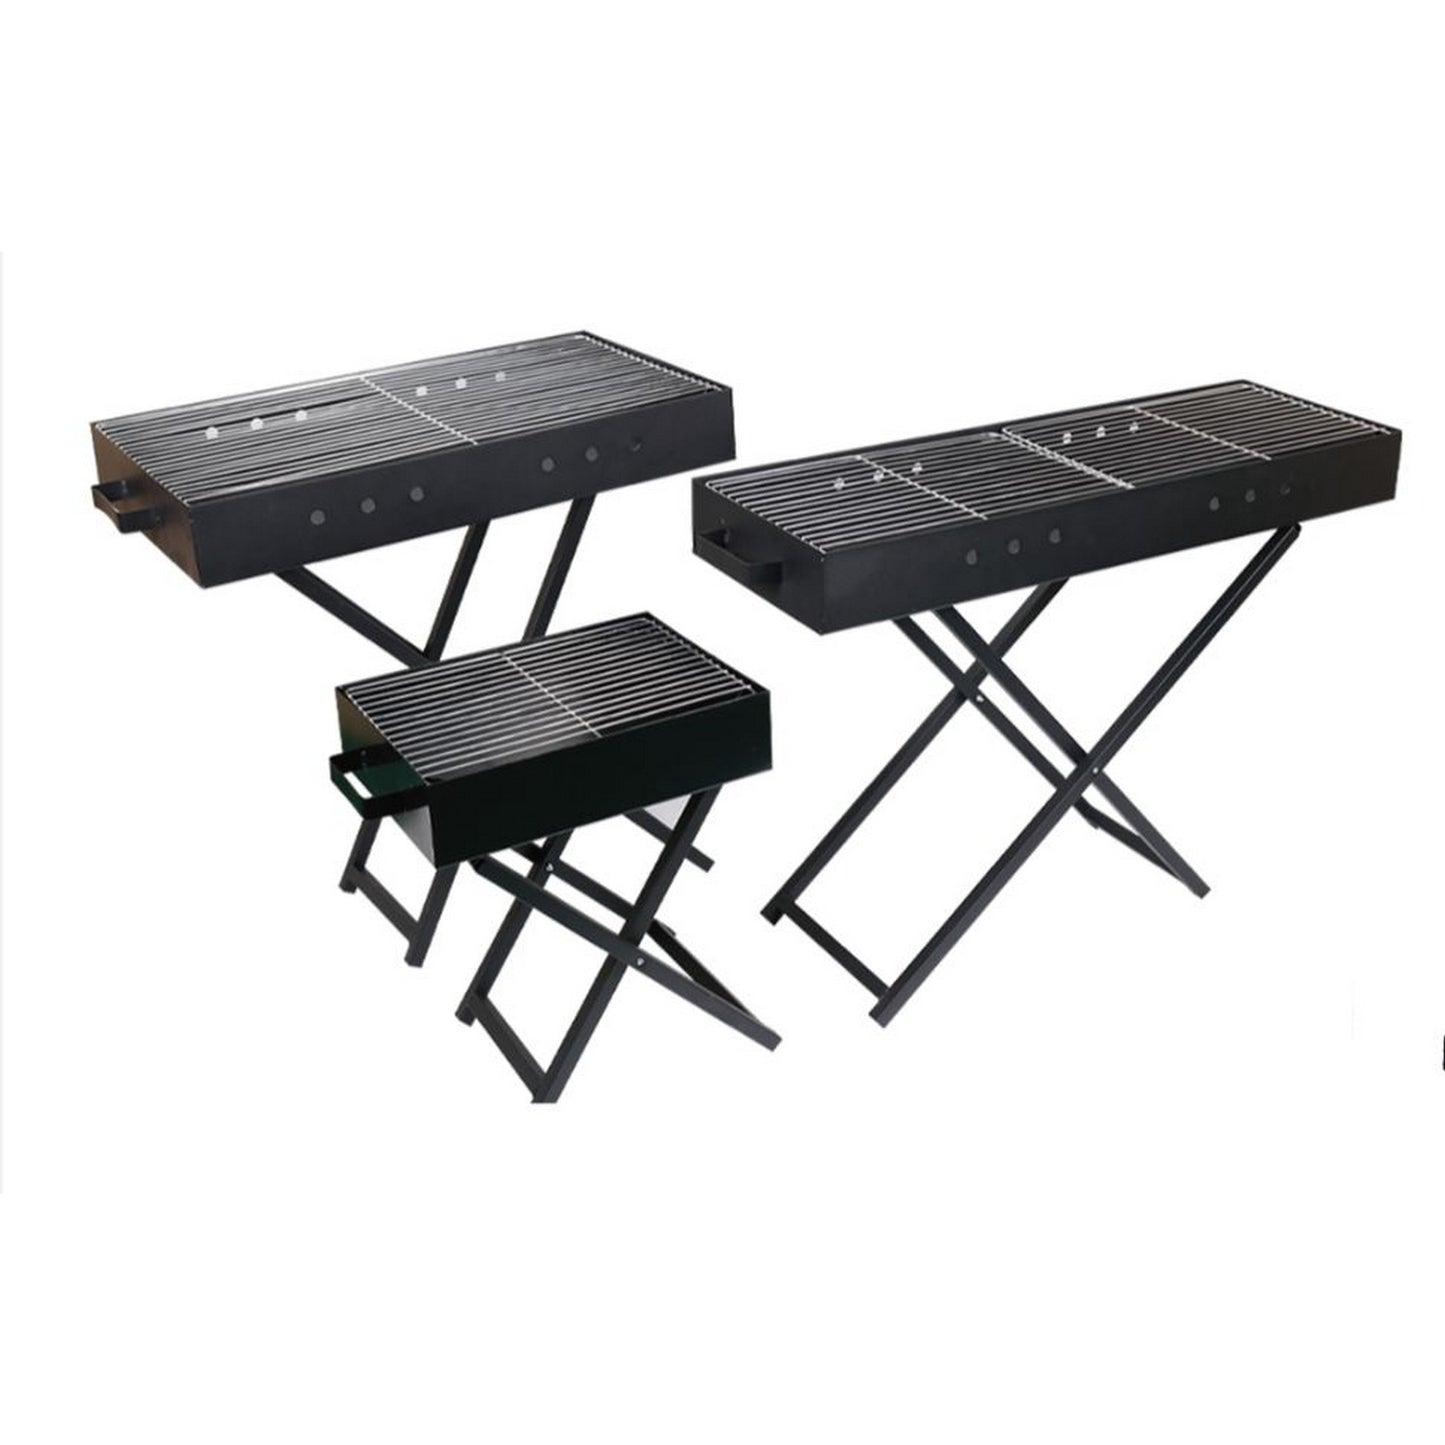 Portable Folding Barbecue Grill Heavy Quality Commercial Use